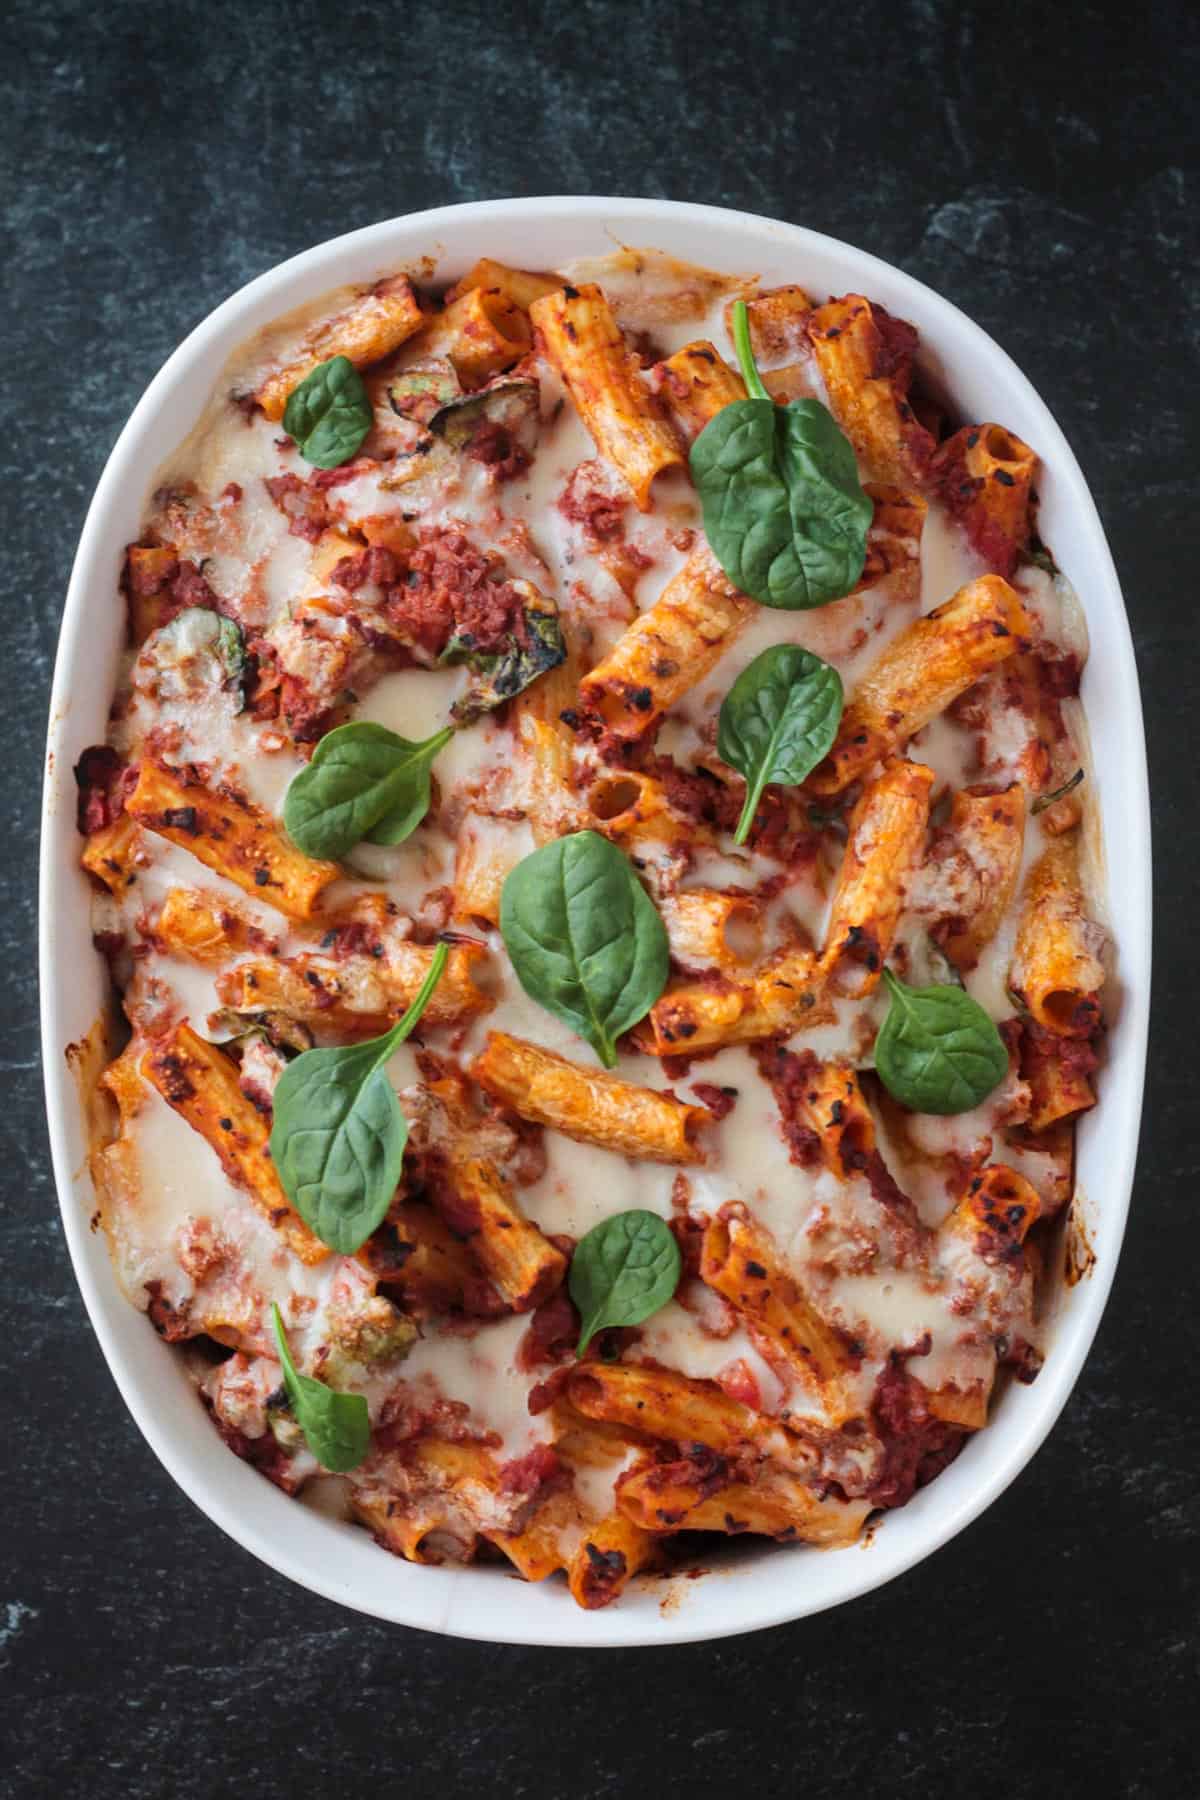 Vegan chorizo pasta bake in a casserole dish garnished with baby spinach leaves.